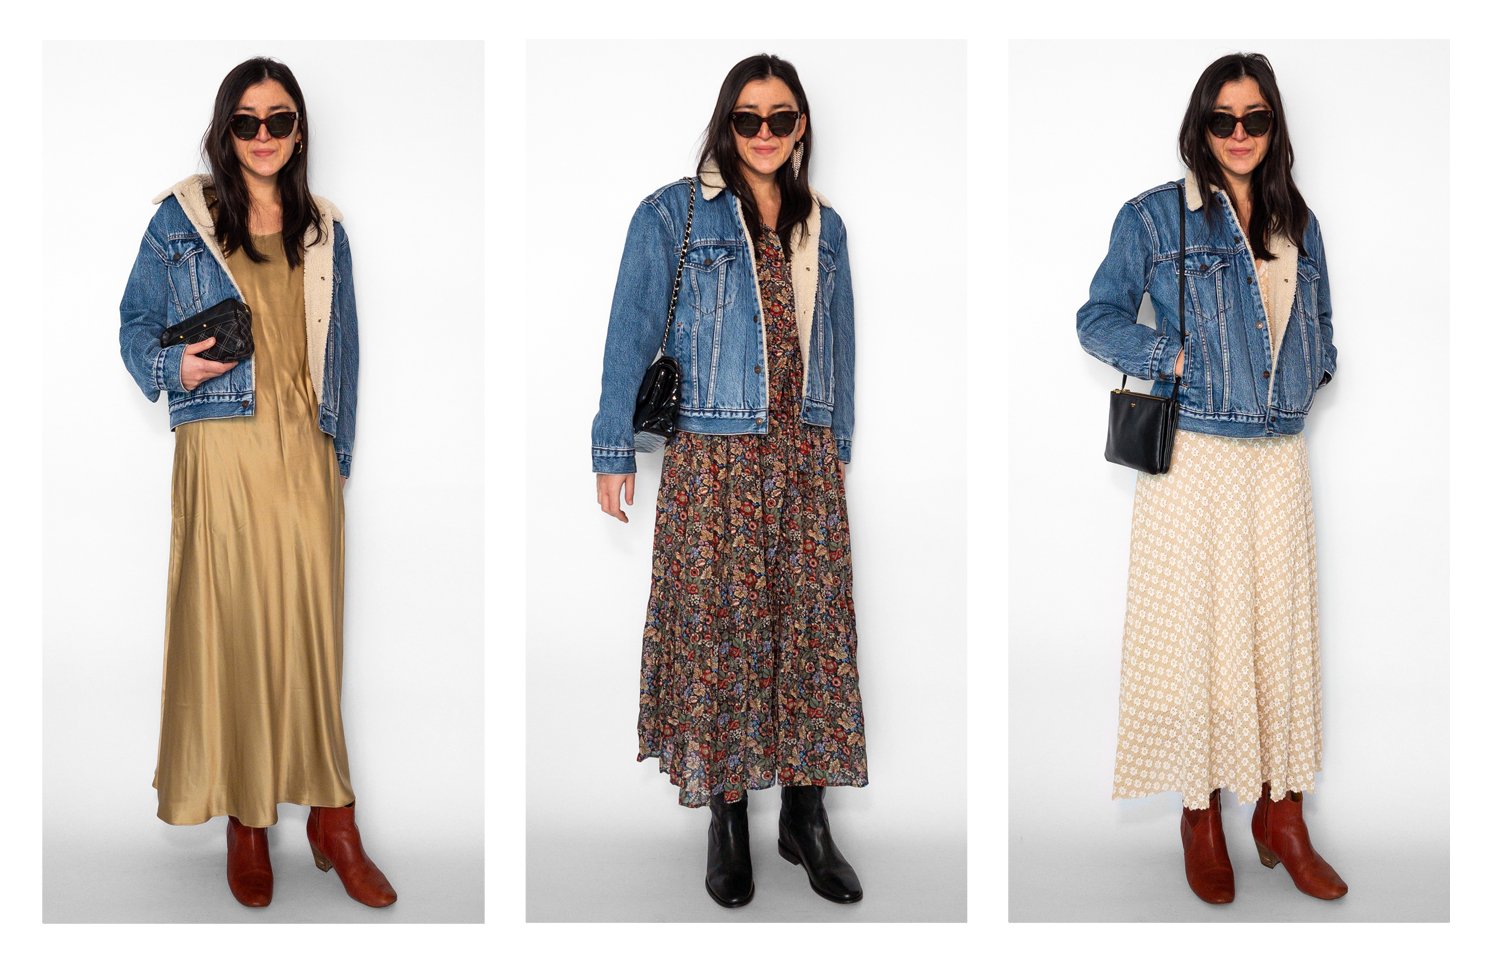 Denim shearling jacket with long dresses outfits